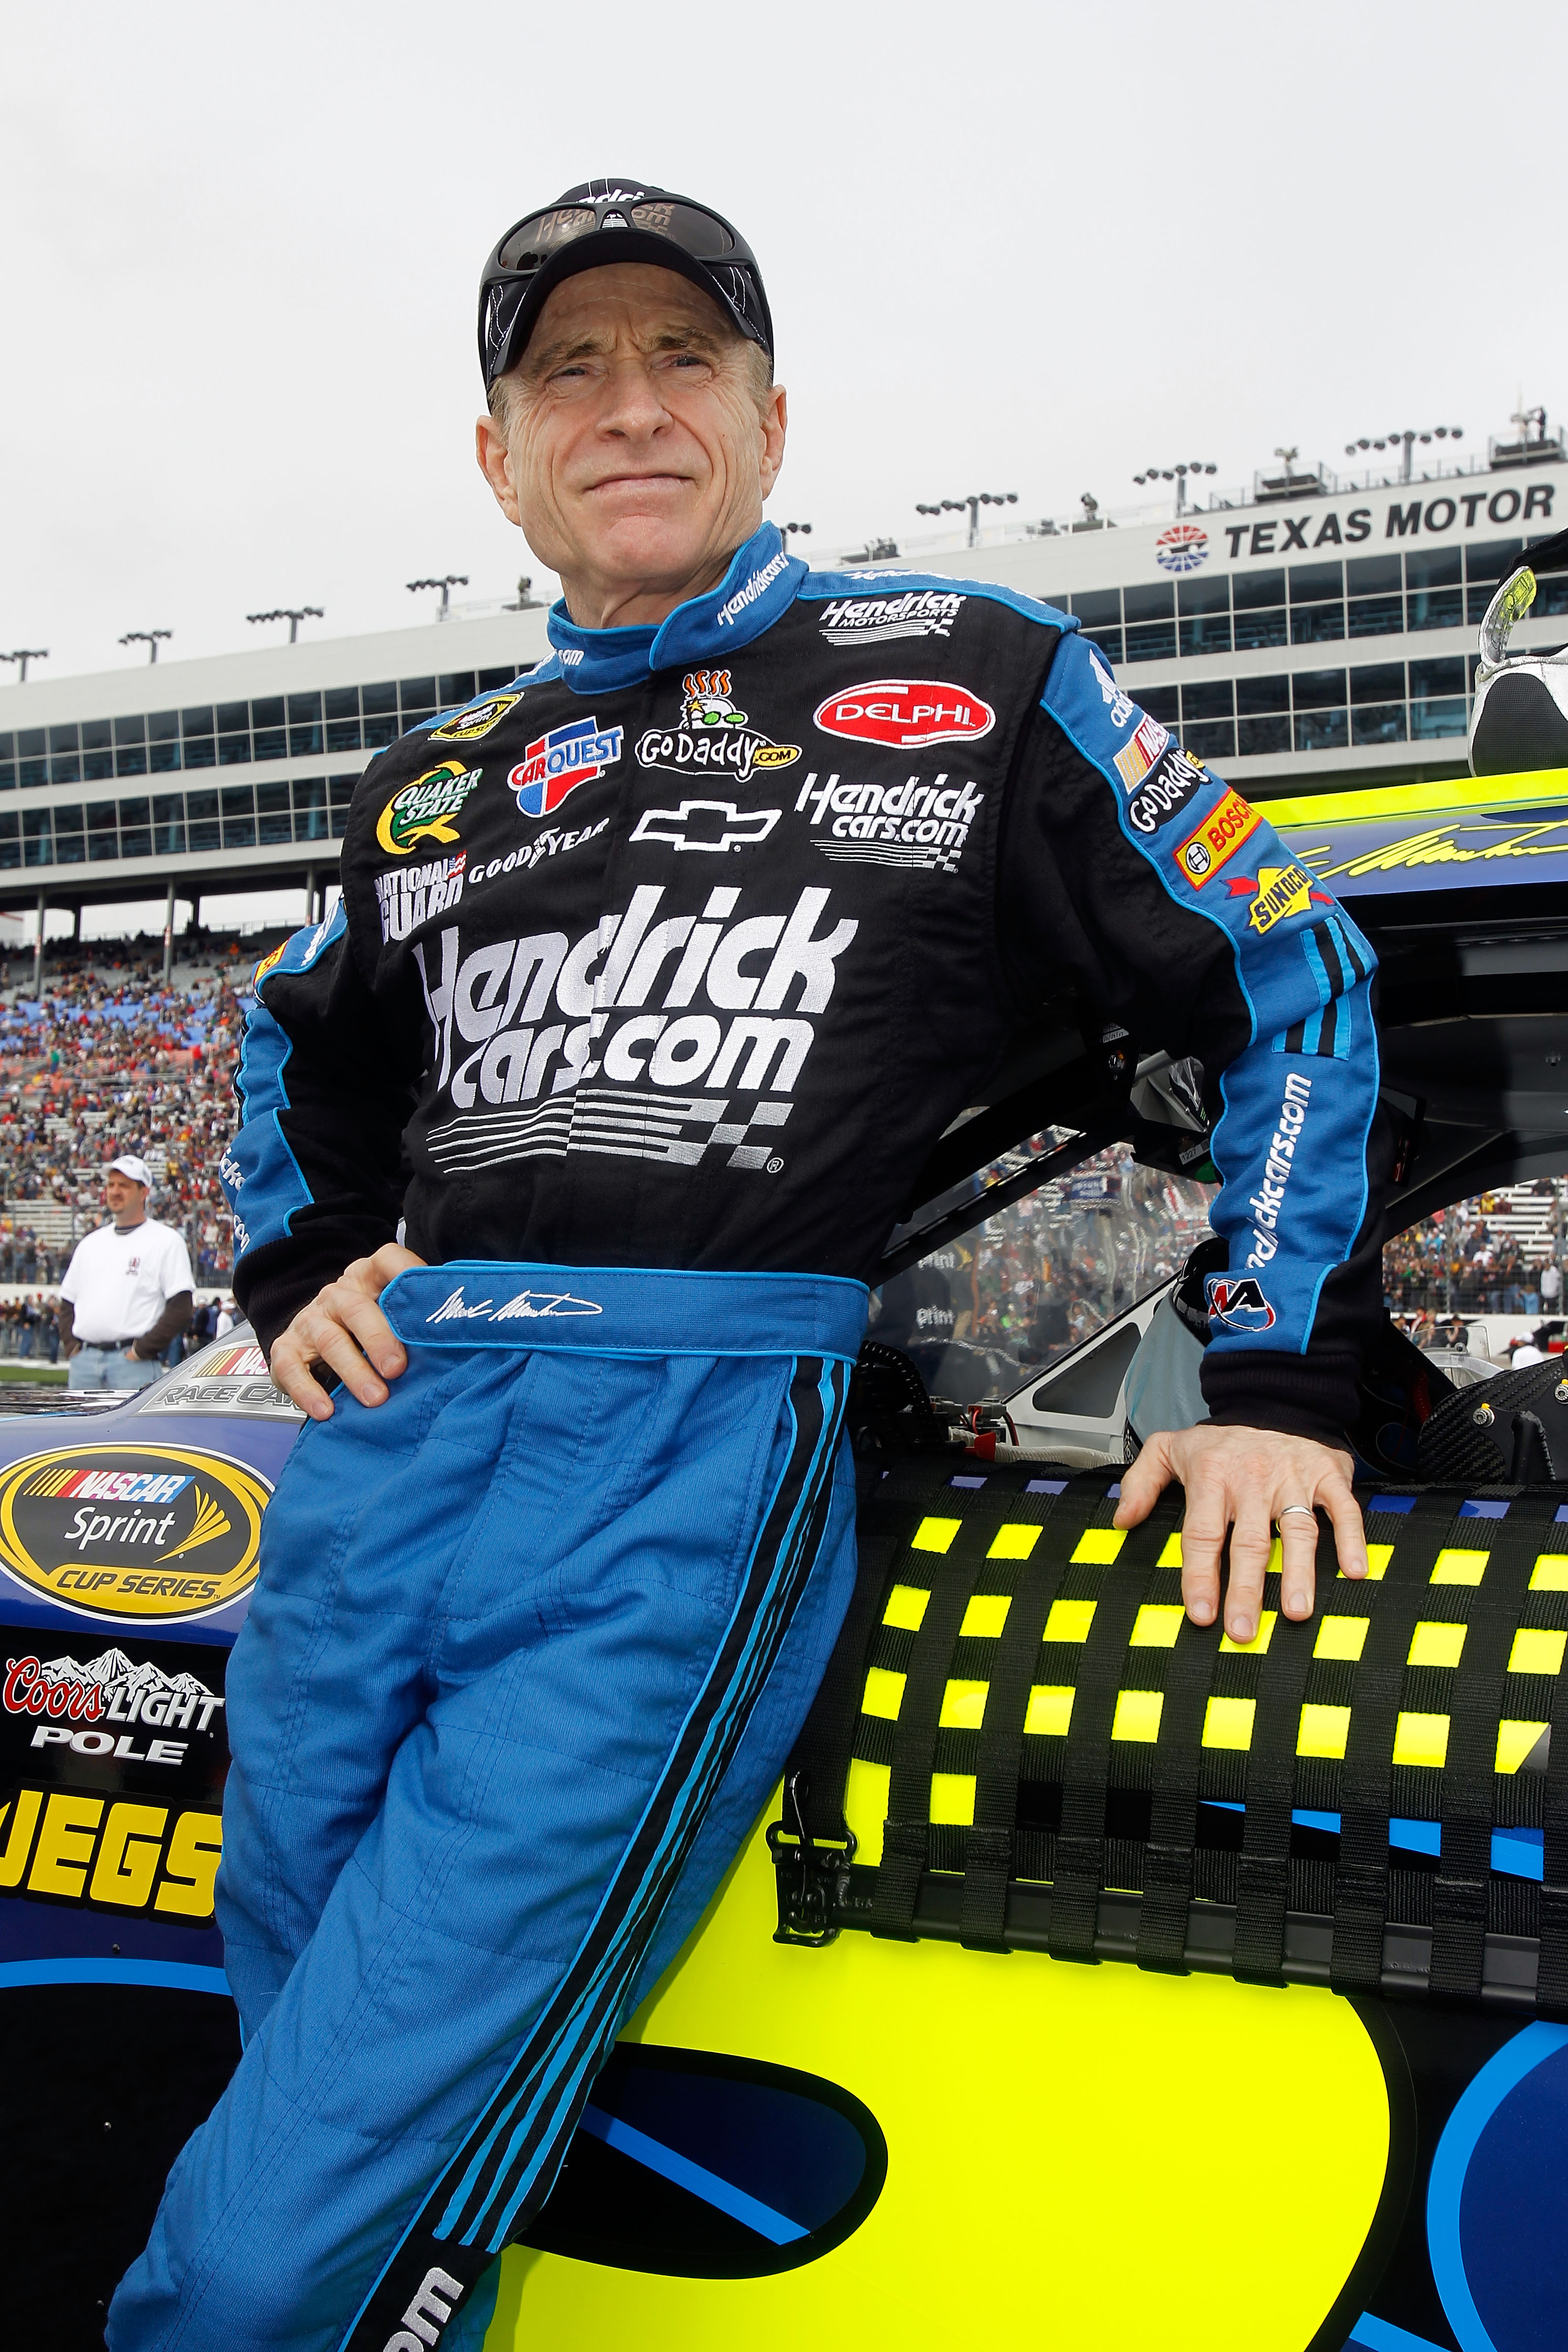 FORT WORTH, TX - APRIL 19:  Mark Martin, driver of the #5 Hendricks.com/GoDaddy.com Chevrolet, looks on prior to the start of the NASCAR Sprint Cup Series Samsung Mobile 500 at Texas Motor Speedway on April 19, 2010 in Fort Worth, Texas.  (Photo by Todd W